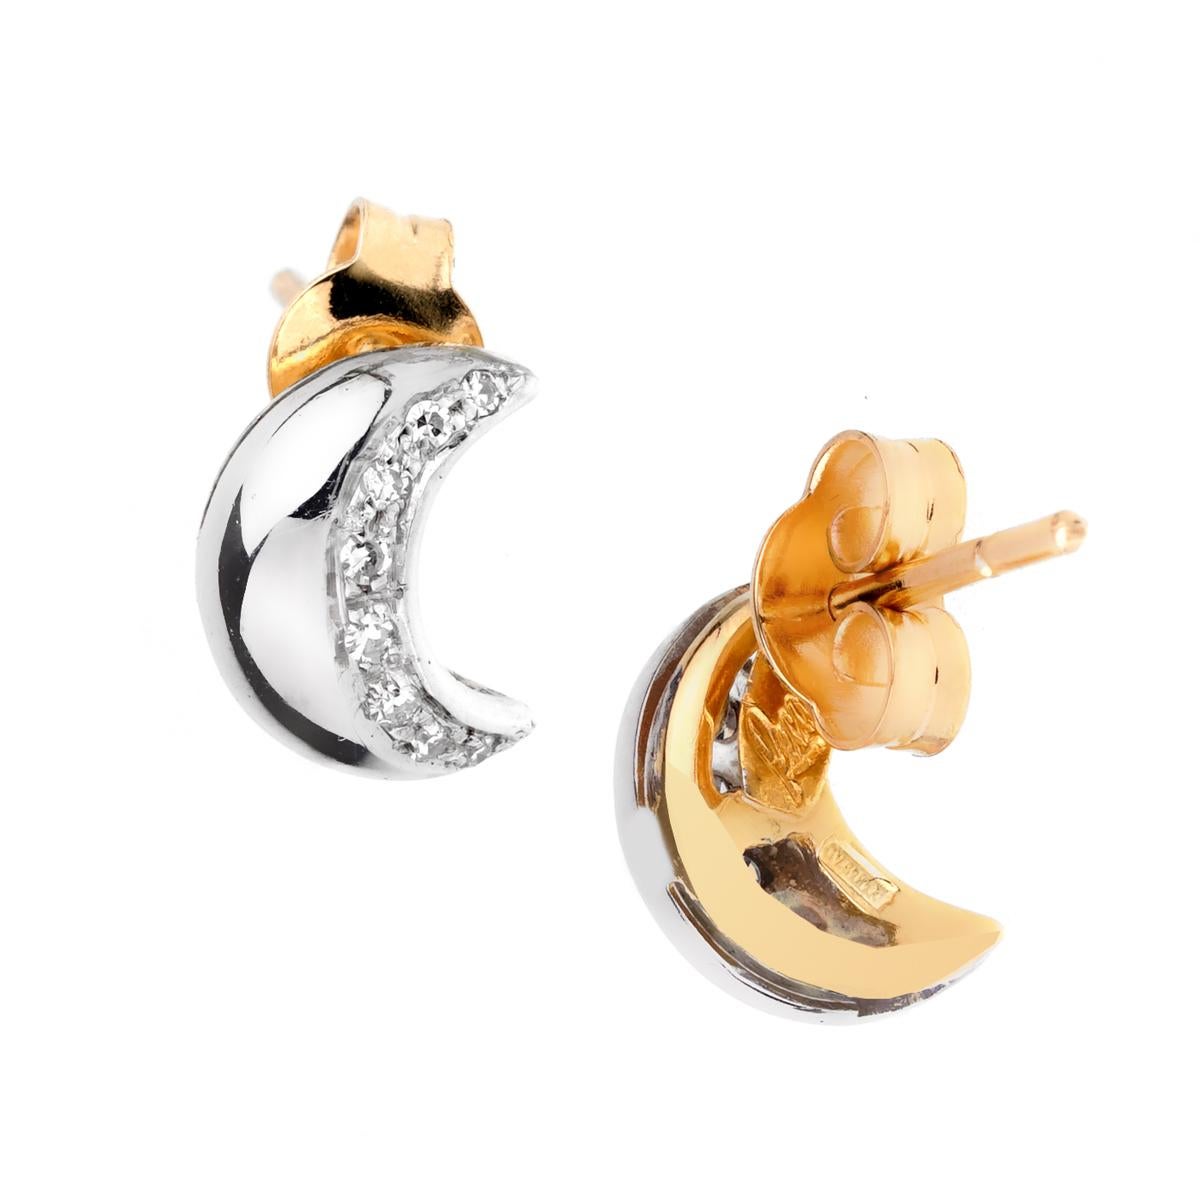 A chic set of Recarlo diamond earrings featuring a moon motif set with round brilliant cut diamonds in 18k white and yellow gold. 